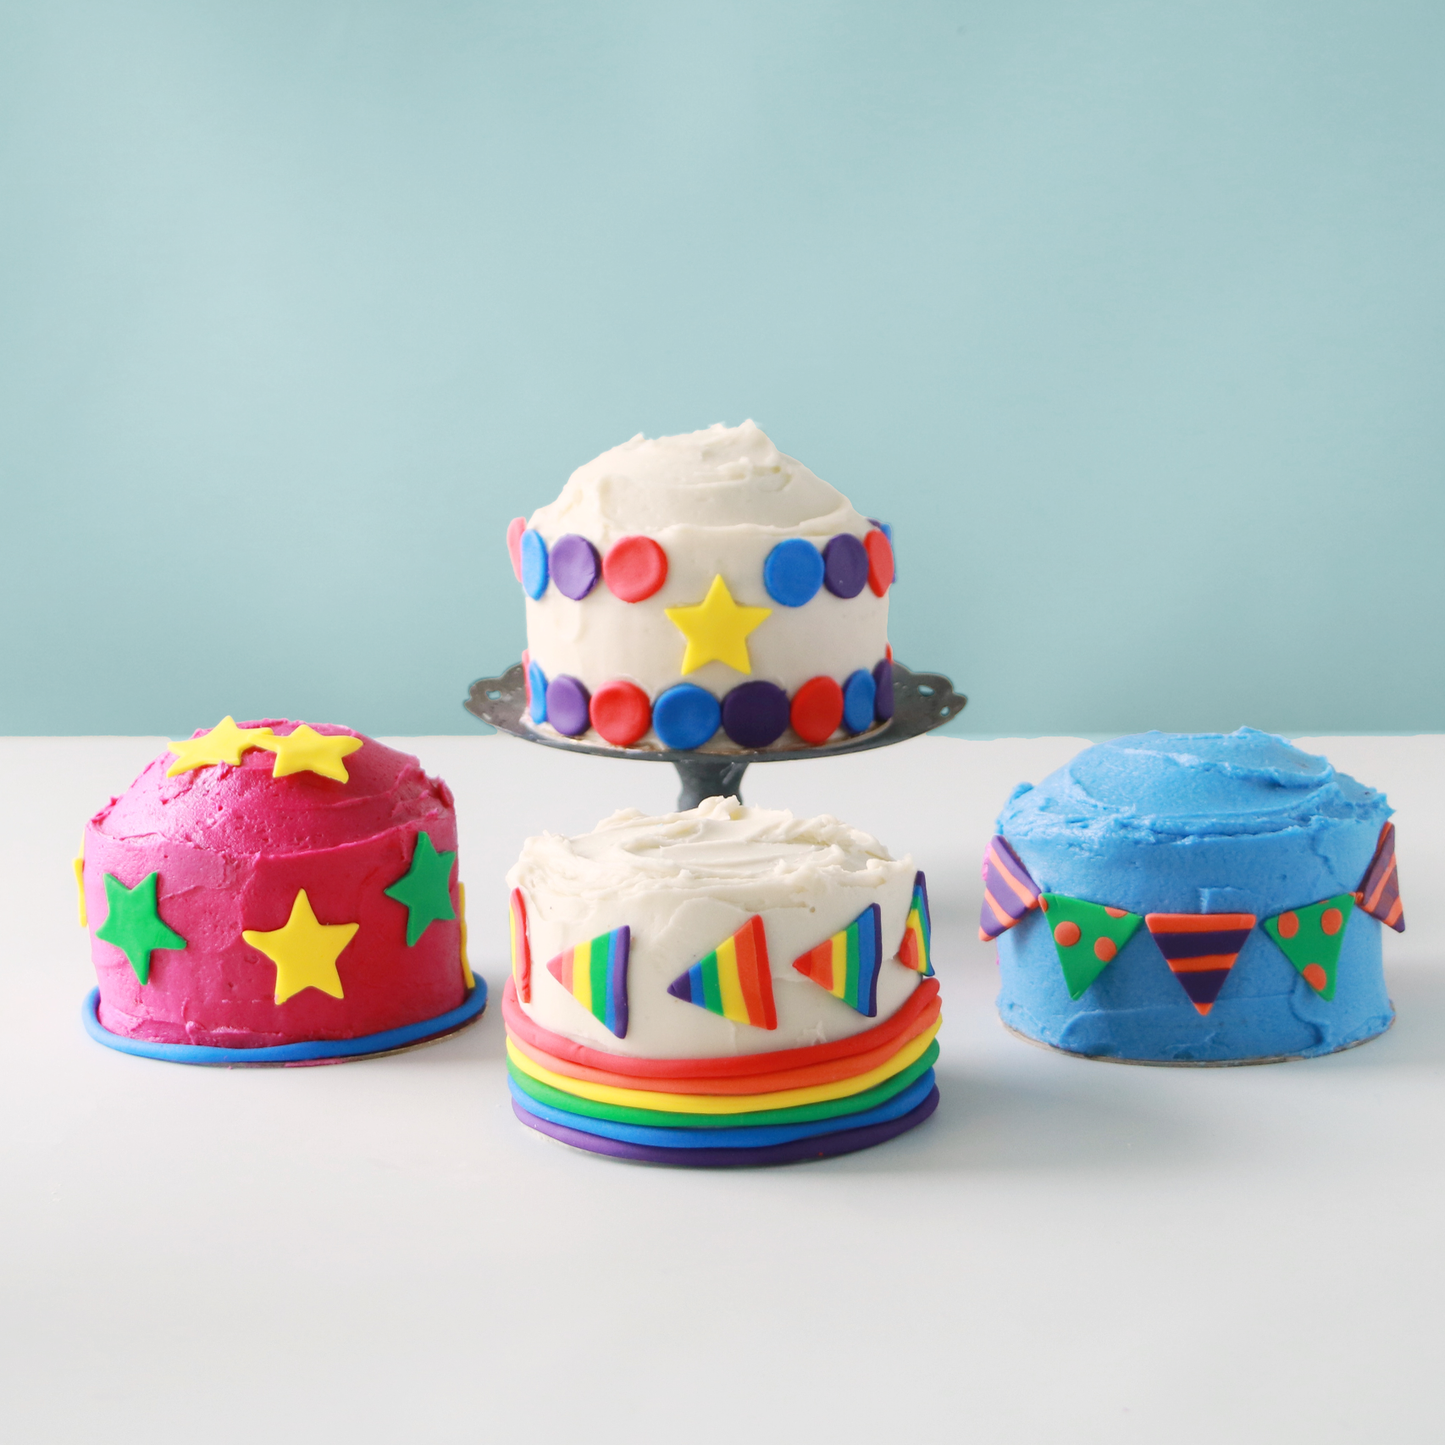 Four mini cakes, decorated with colored buttercream and fondant